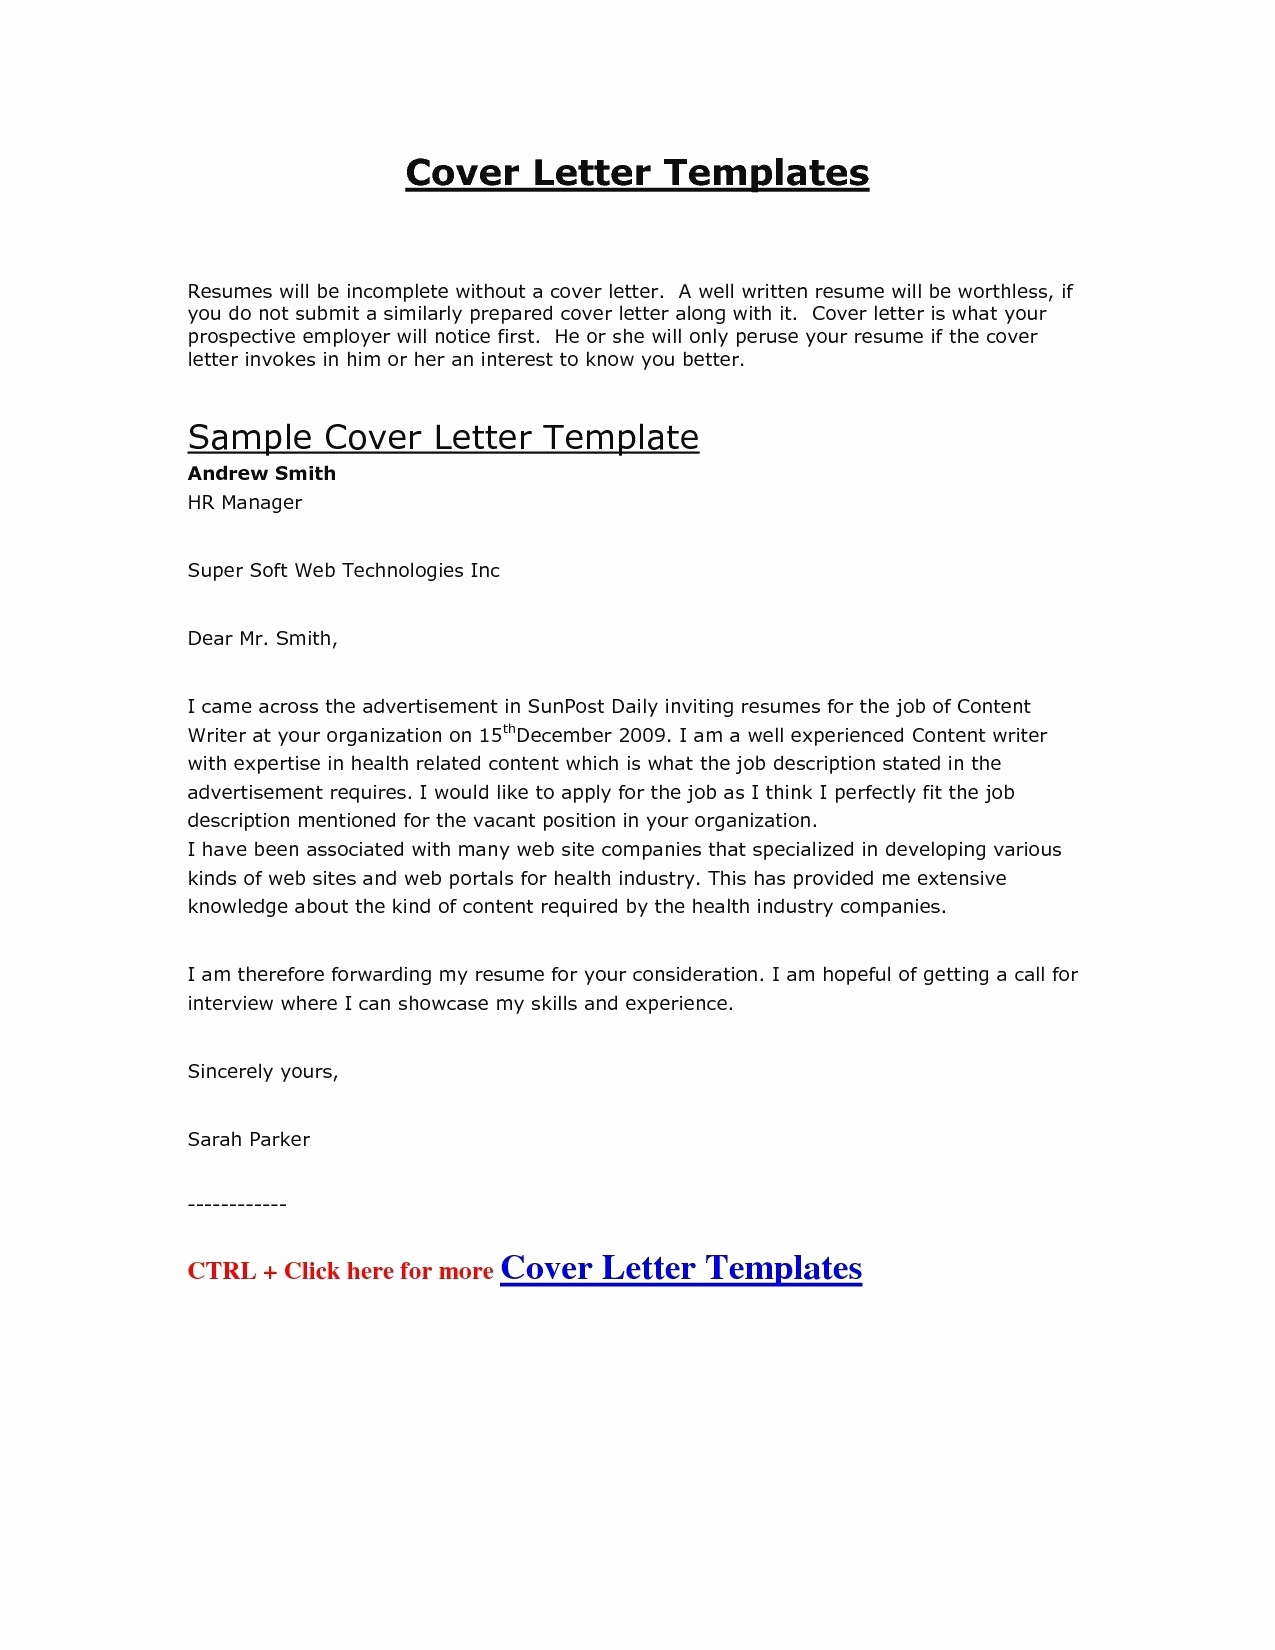 Sample Cover Letter Template for Job Application - Good Cover Letter Examples Inspirational Job Application format